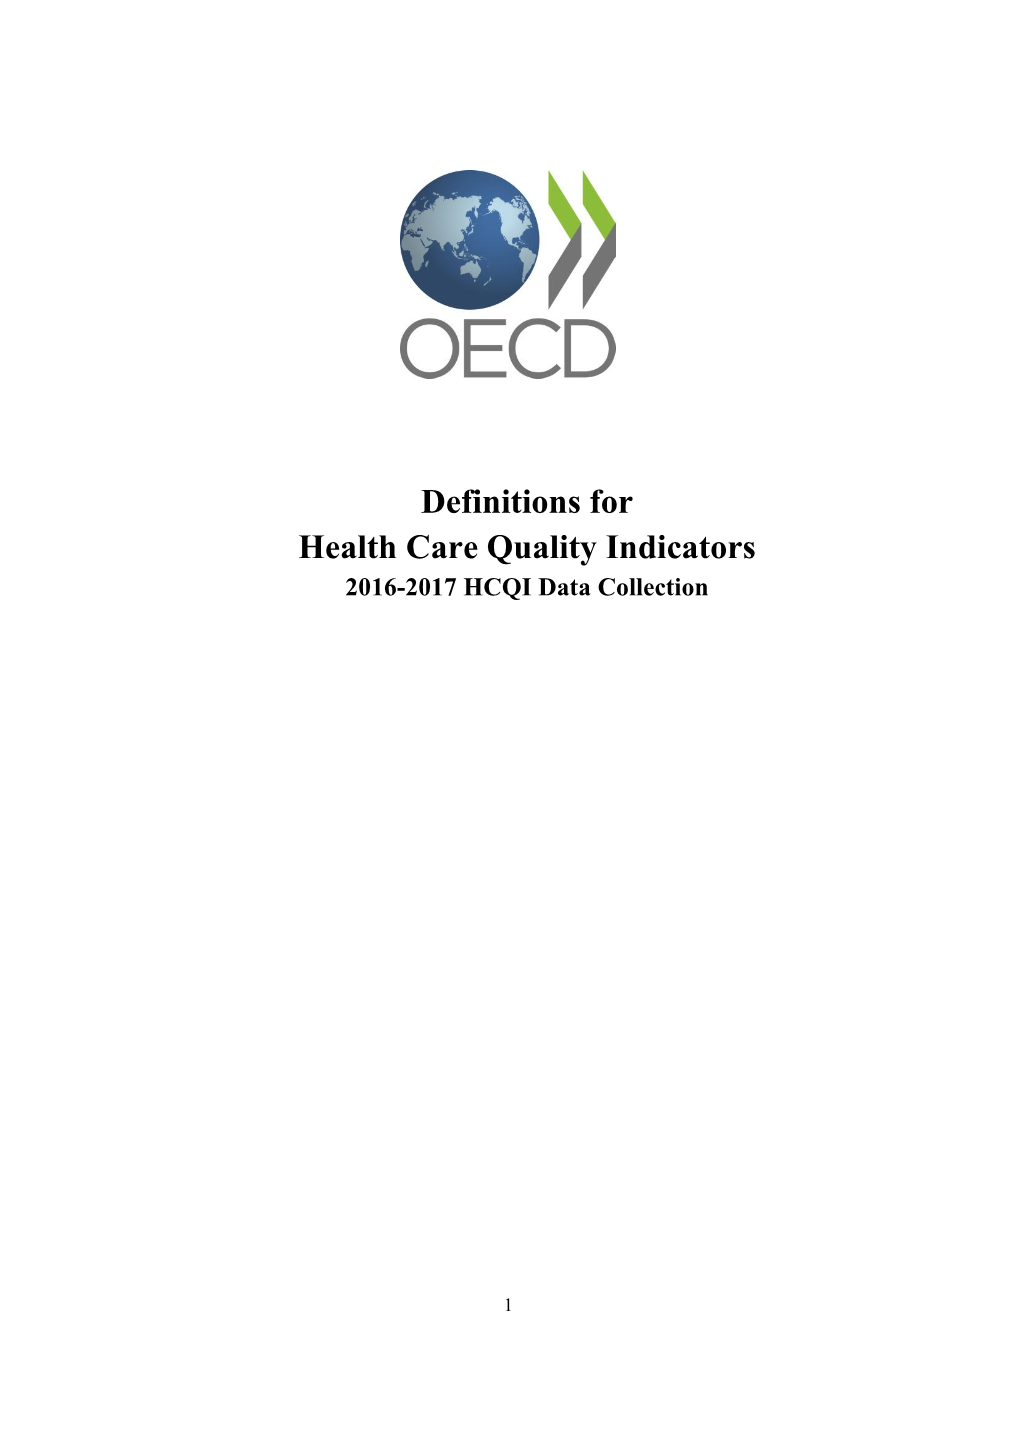 Definitions for Health Care Quality Indicators 2016-2017 HCQI Data Collection